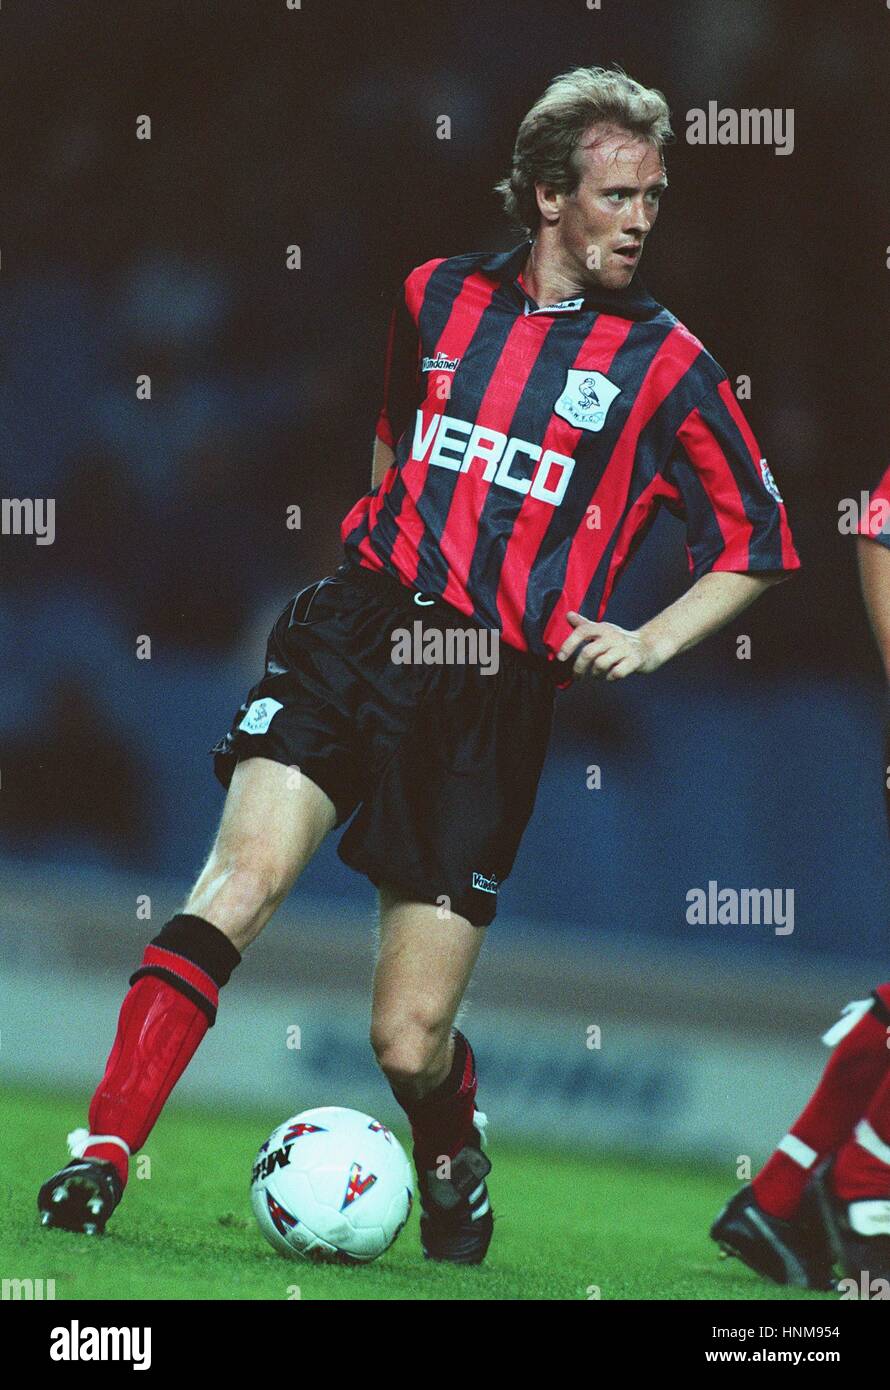 DAVE CARROLL WYCOMBE WANDERERS FC 05 October 1995 Stock Photo